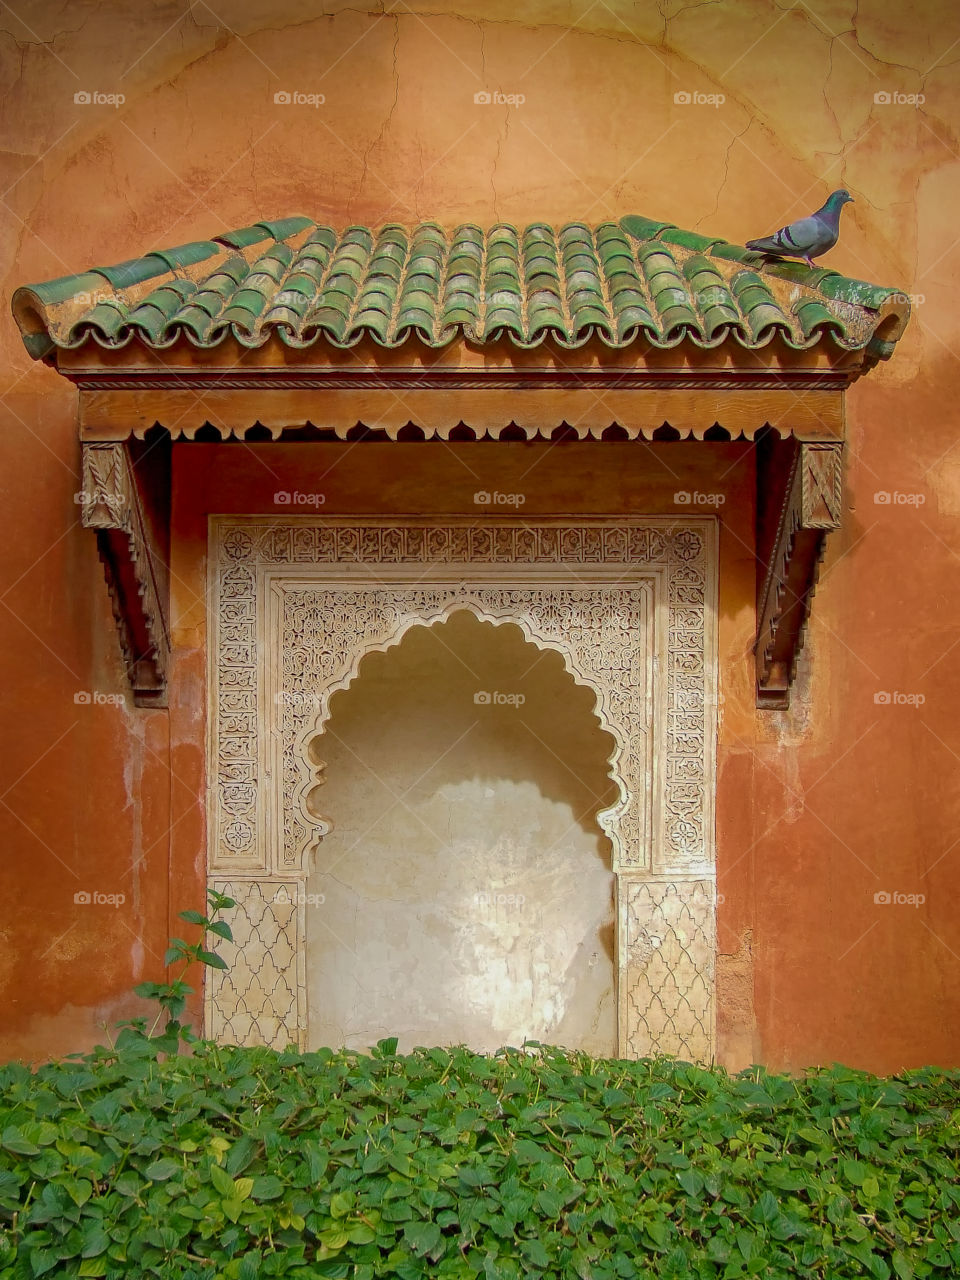 Mysterious gate to nowhere. Decorative feature in earthy colored wall. Marrakesh. Morocco.